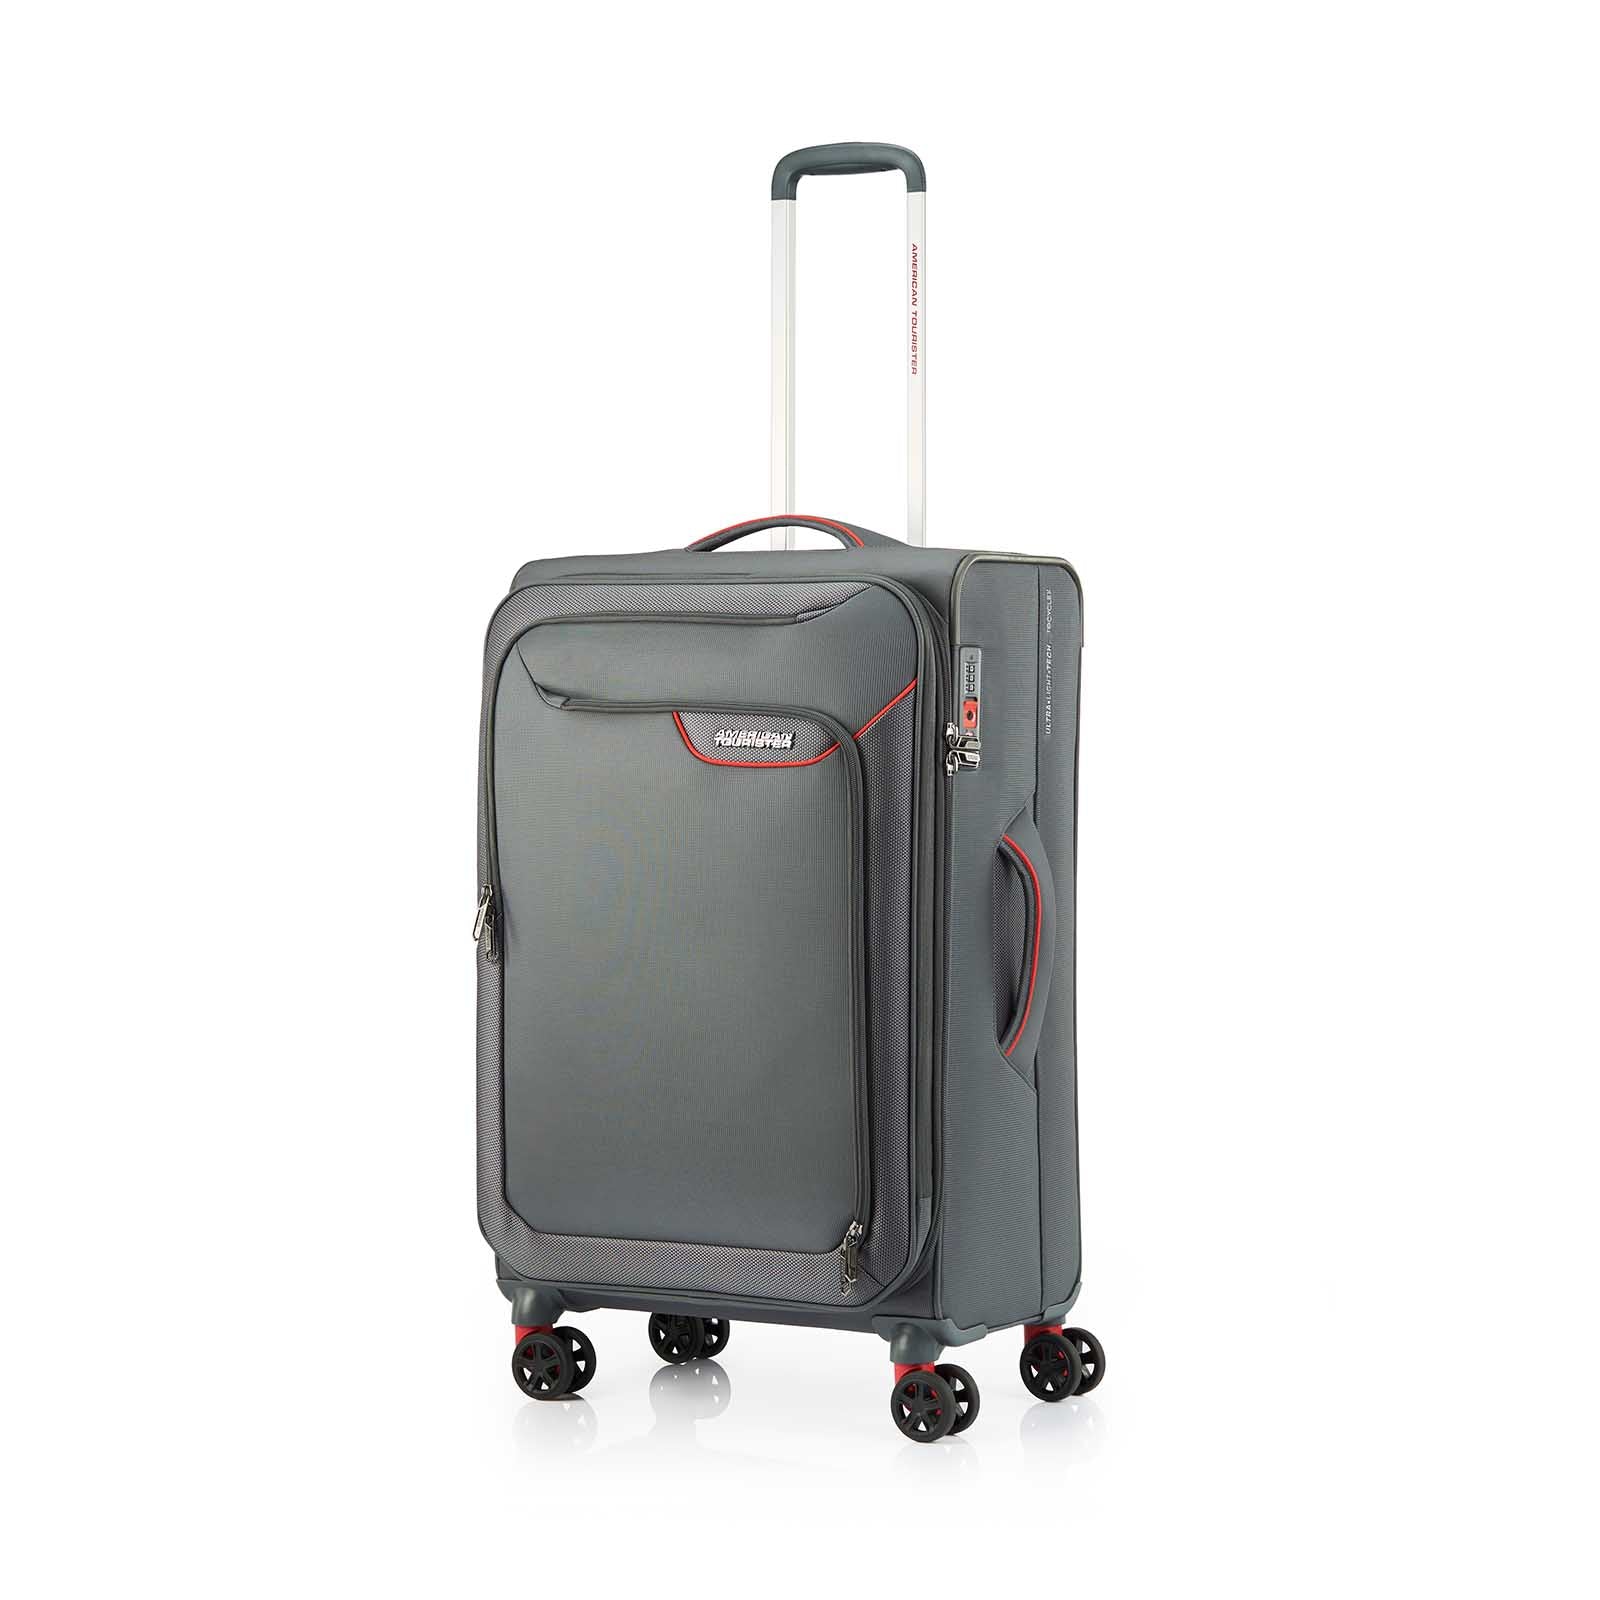 American-Tourister-Applite-4-Eco-71cm-Suitcase-Grey-Red-Front-Angle